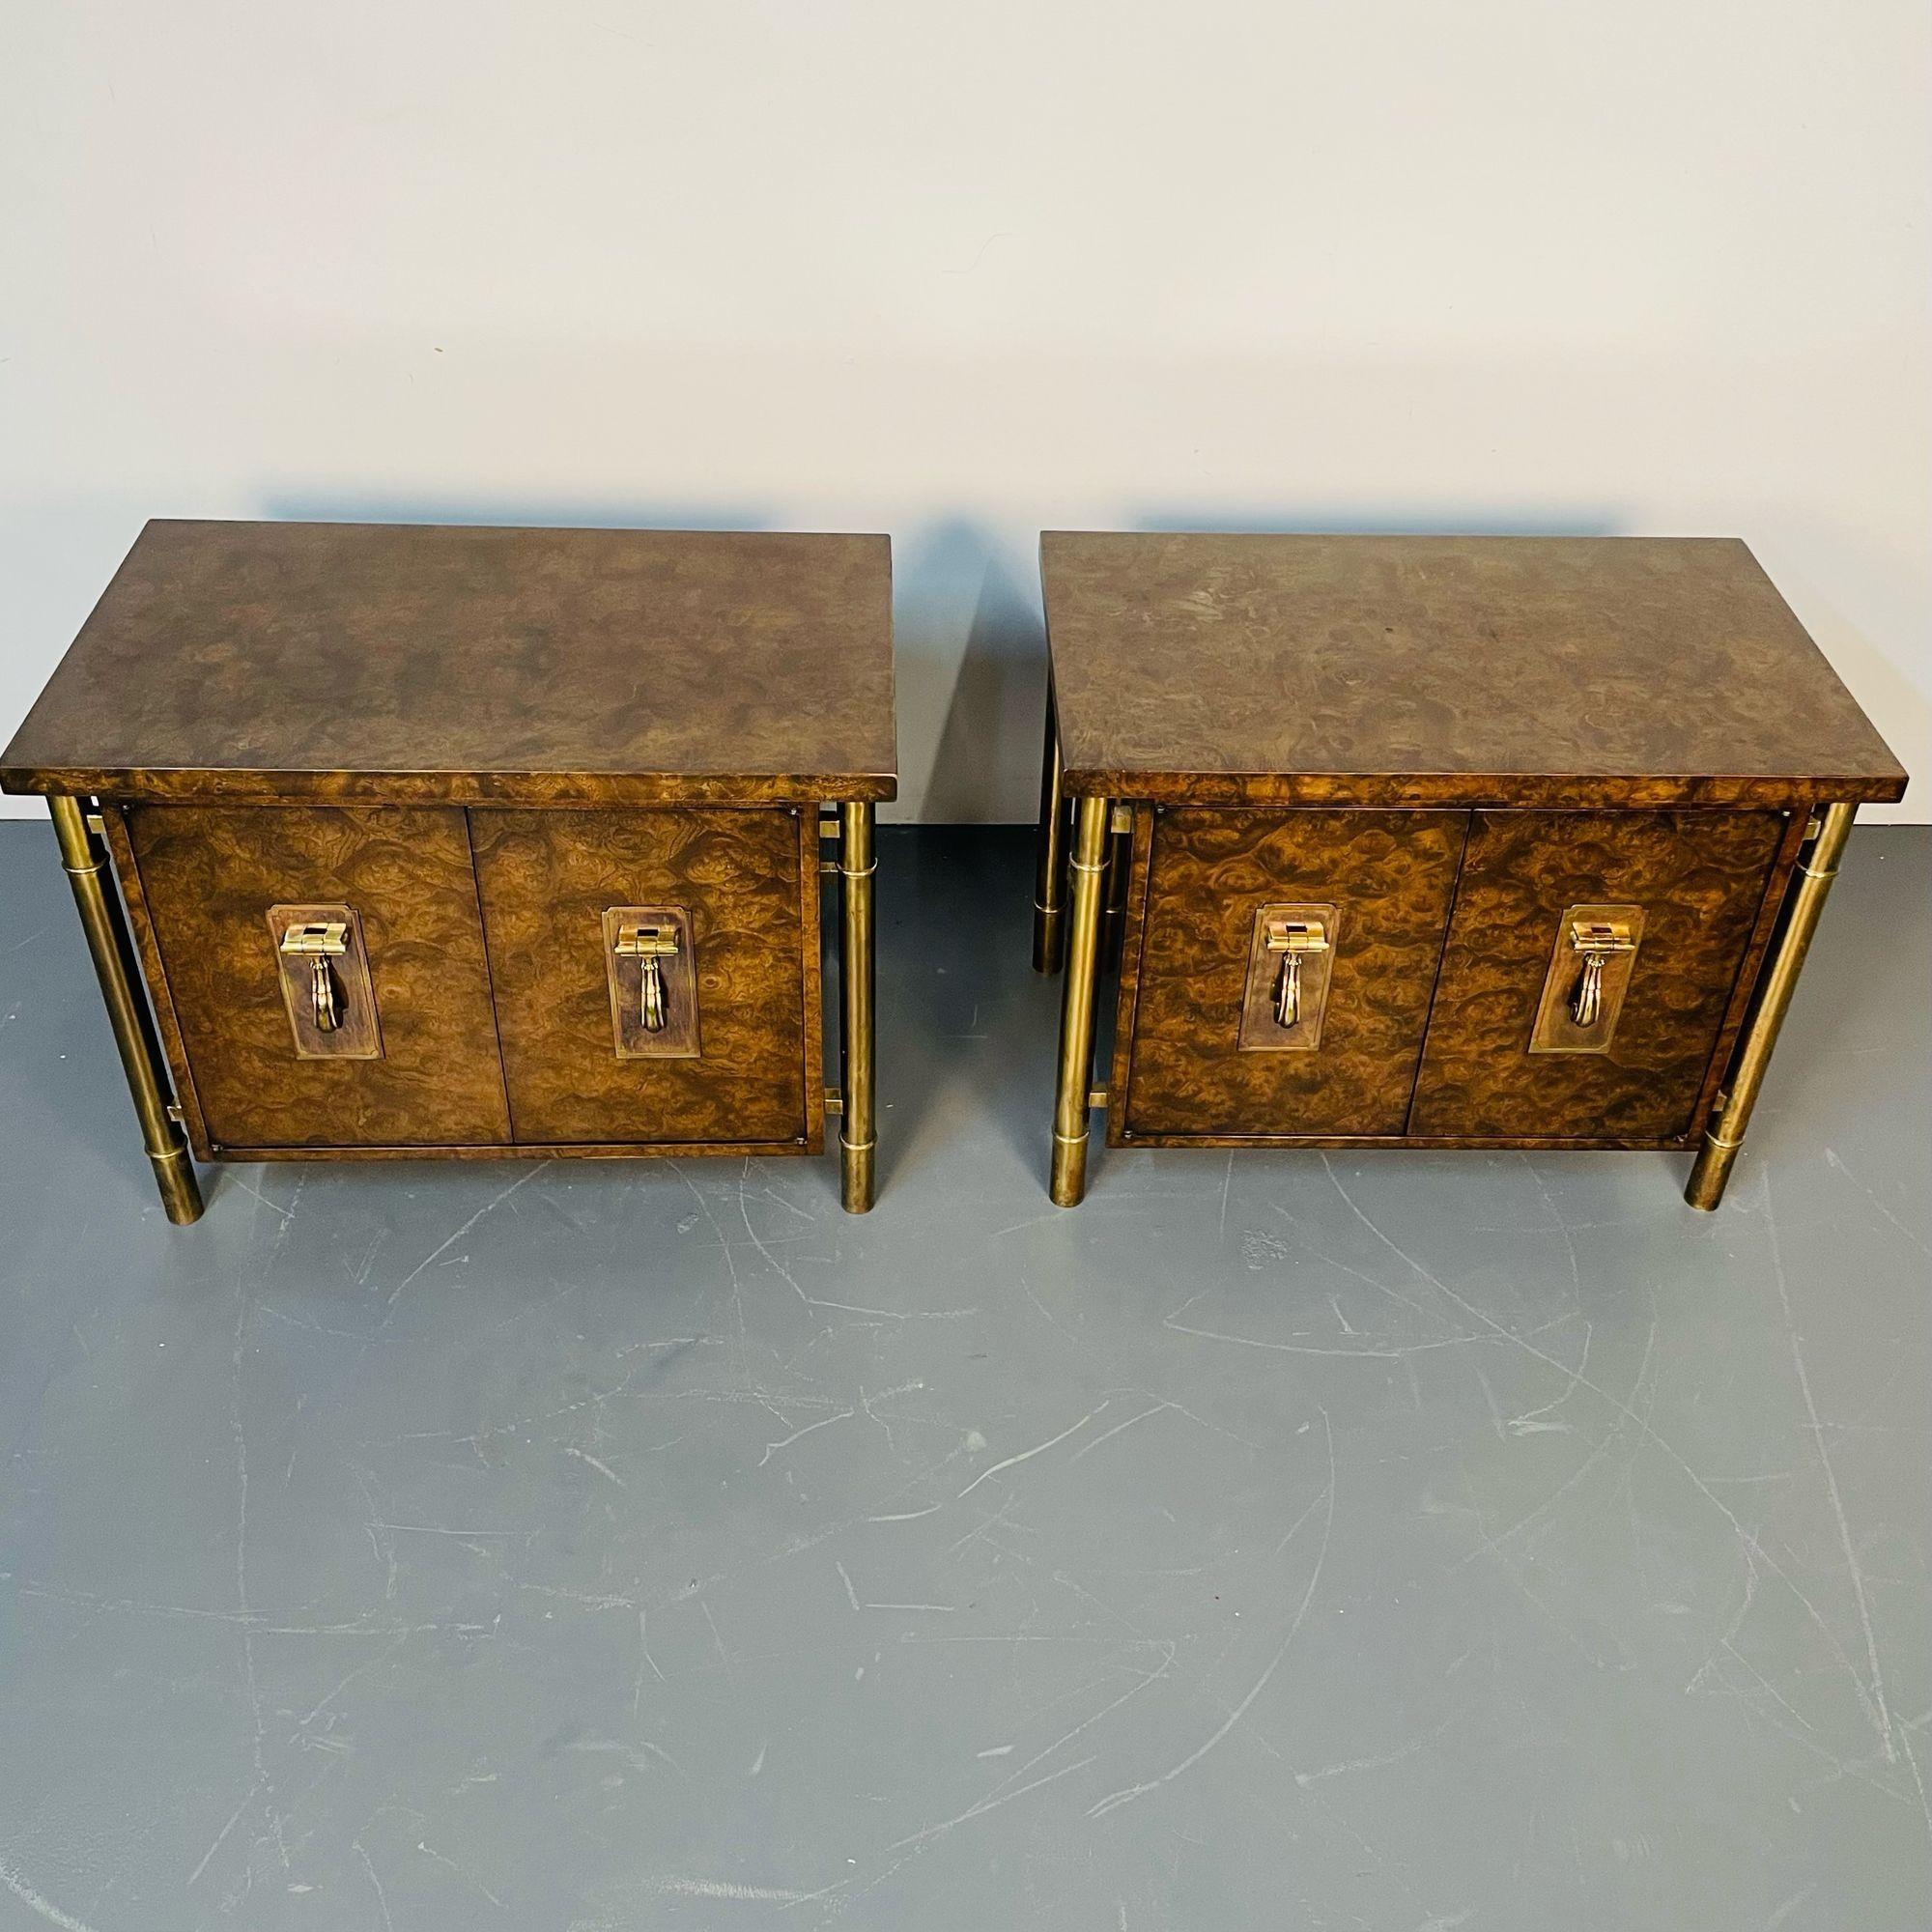 American Pair Mid-Century Modern Mastercraft Nightstands, Floating Cabinets in Elm, Brass For Sale